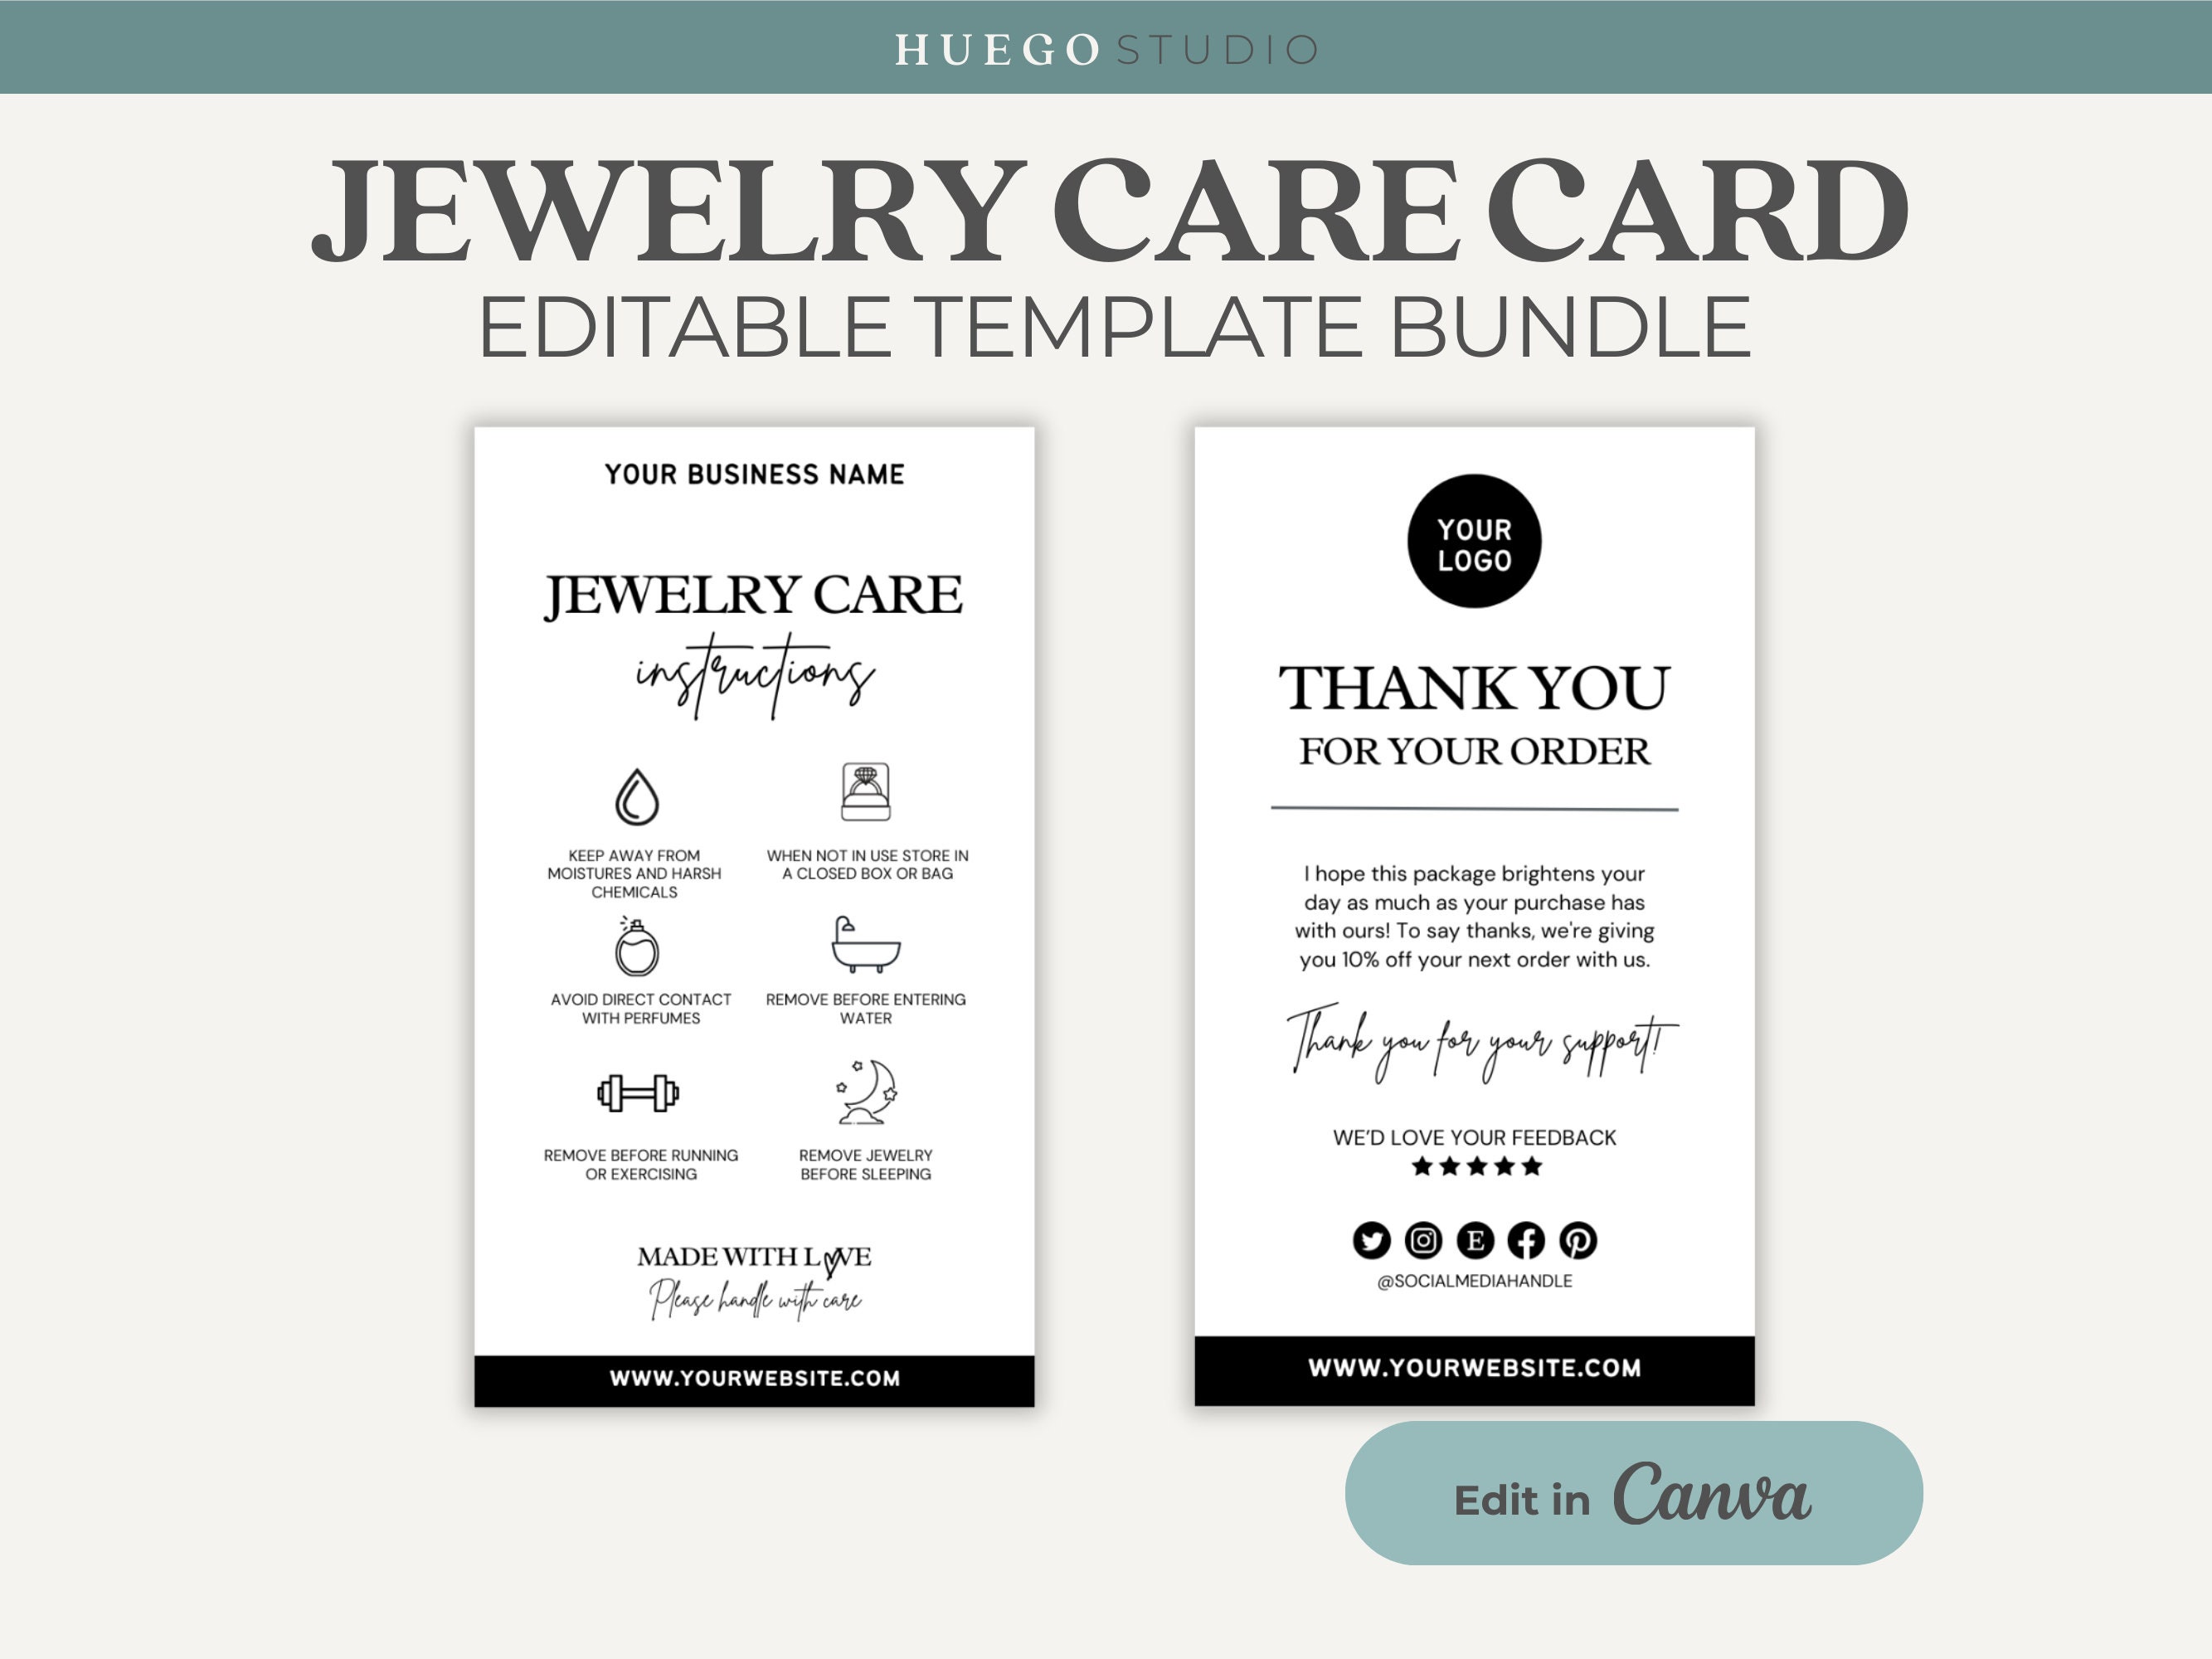 Jewelry Care Archives - The Jewelry Find